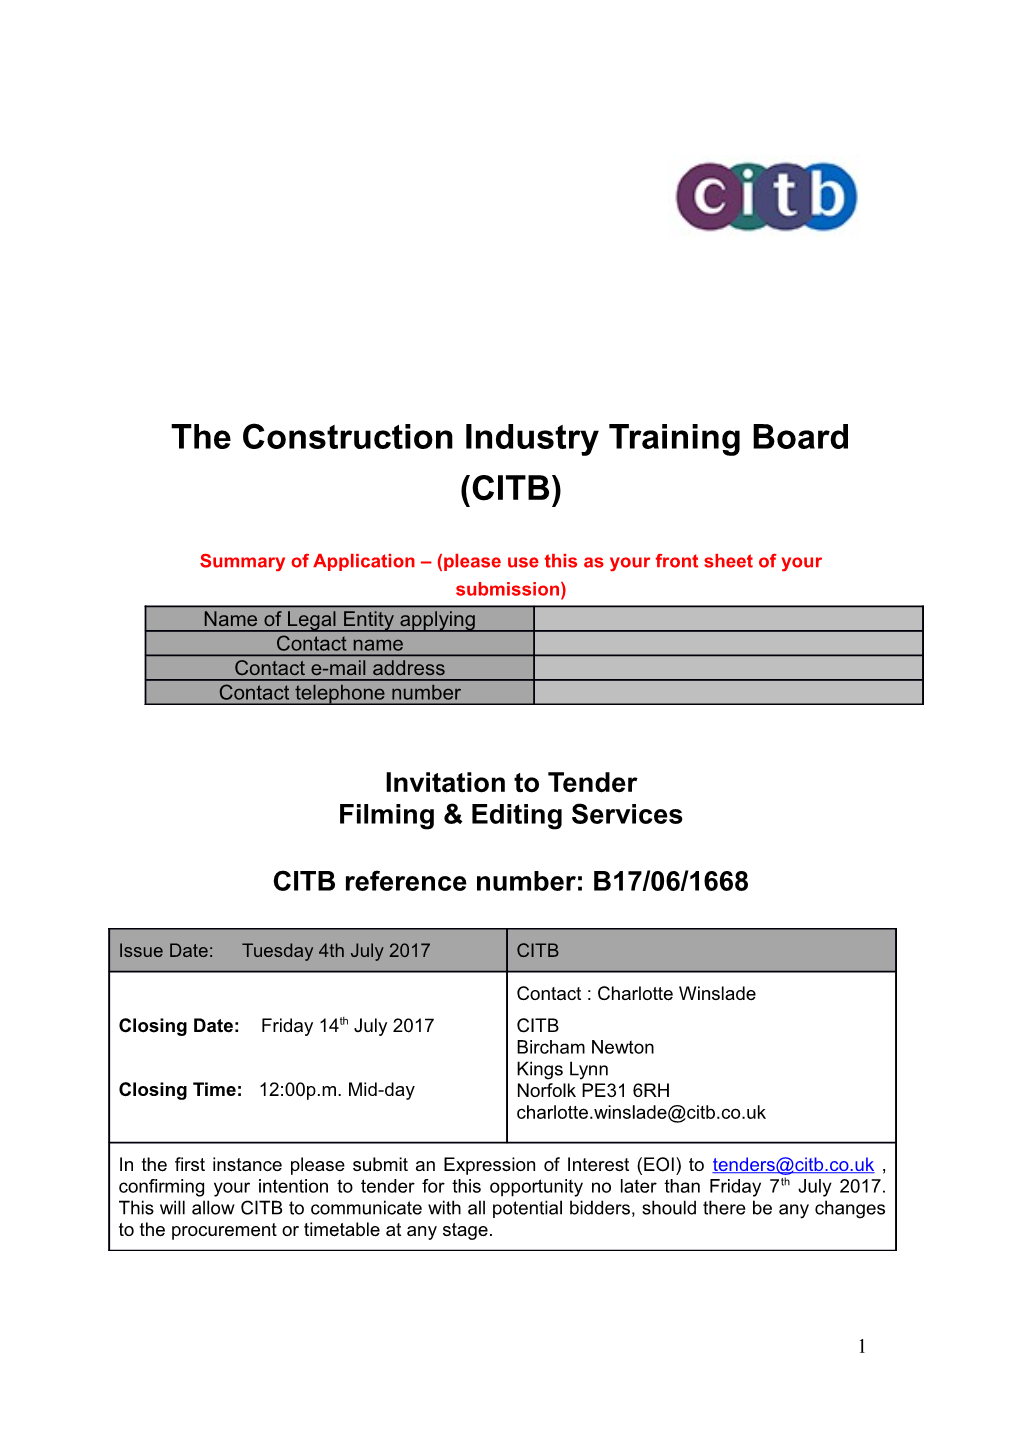 The Construction Industry Training Board (CITB)